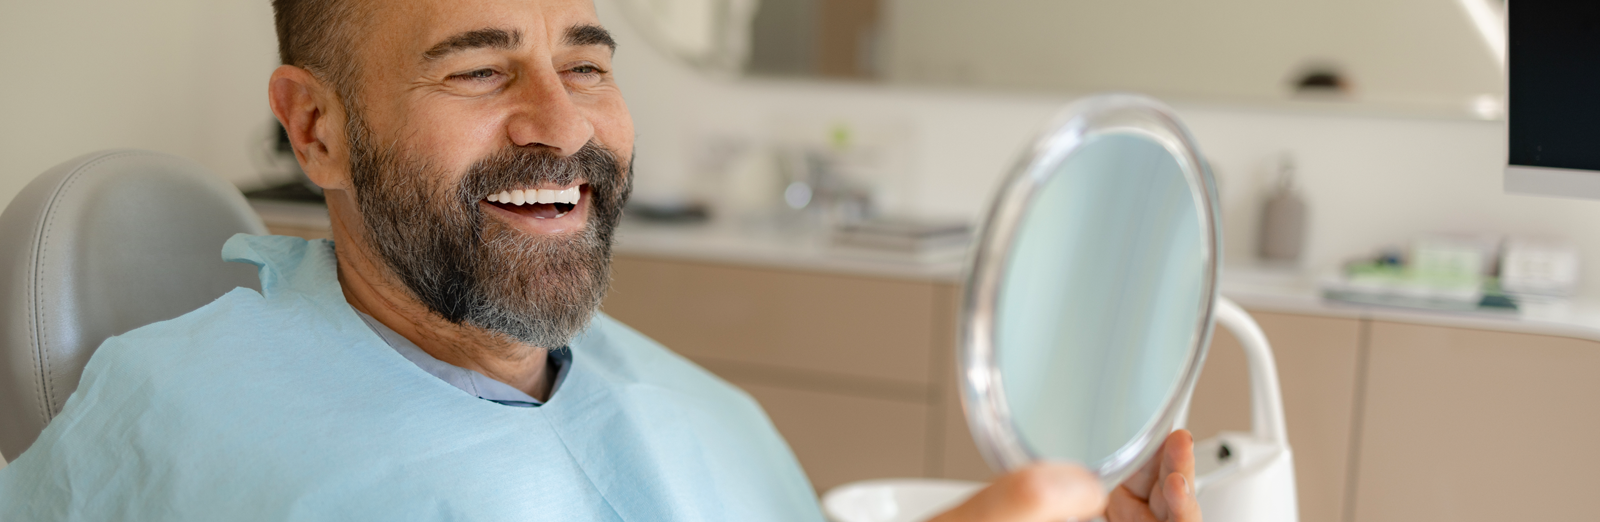 man-smiling-in-mirror-at-dentist-1600x522.png